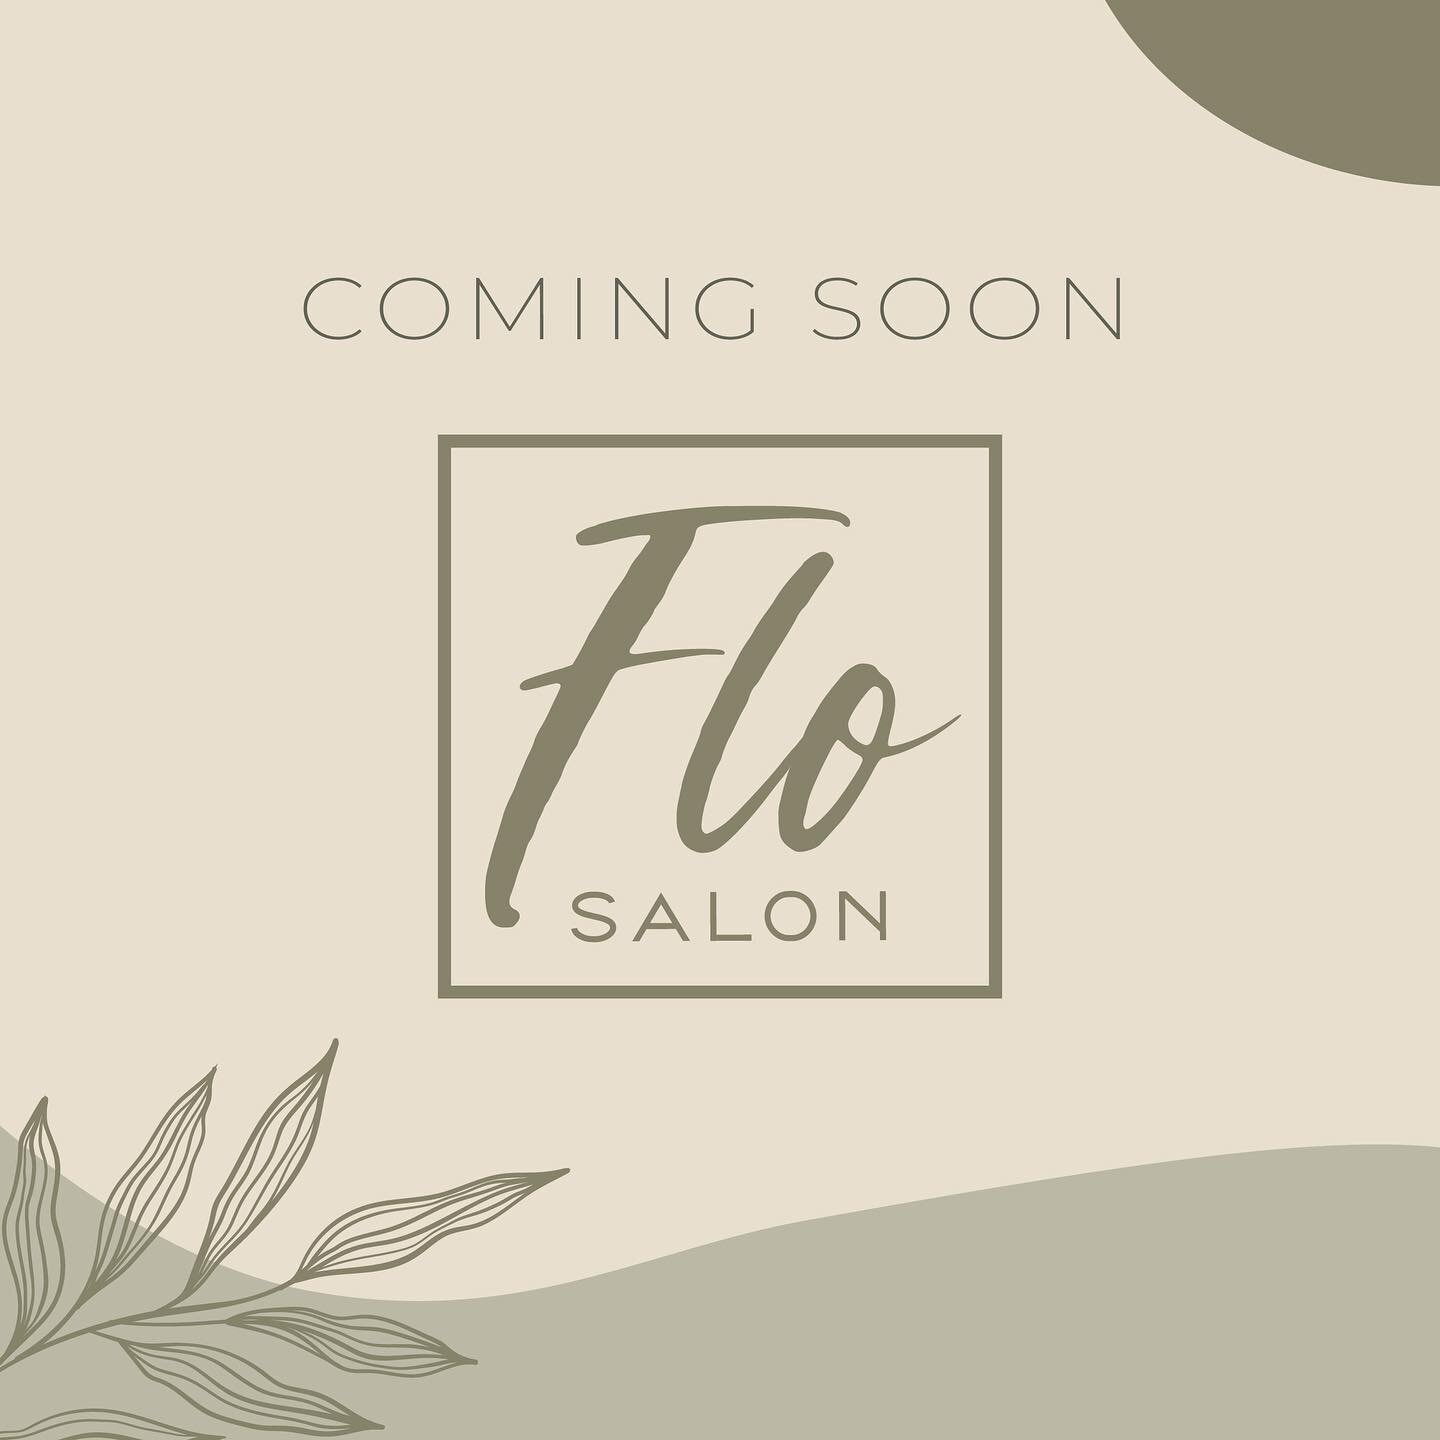 The countdown is on! ✨I am so excited to show you all what I&rsquo;ve been working on these last few months 🤩. Stay tuned for more updates leading up to opening day. FLO SALON ➡️ COMING SOON! ⏳🌿
&bull;
&bull;
&bull;
&bull;
#flosalon #newsalon #salo